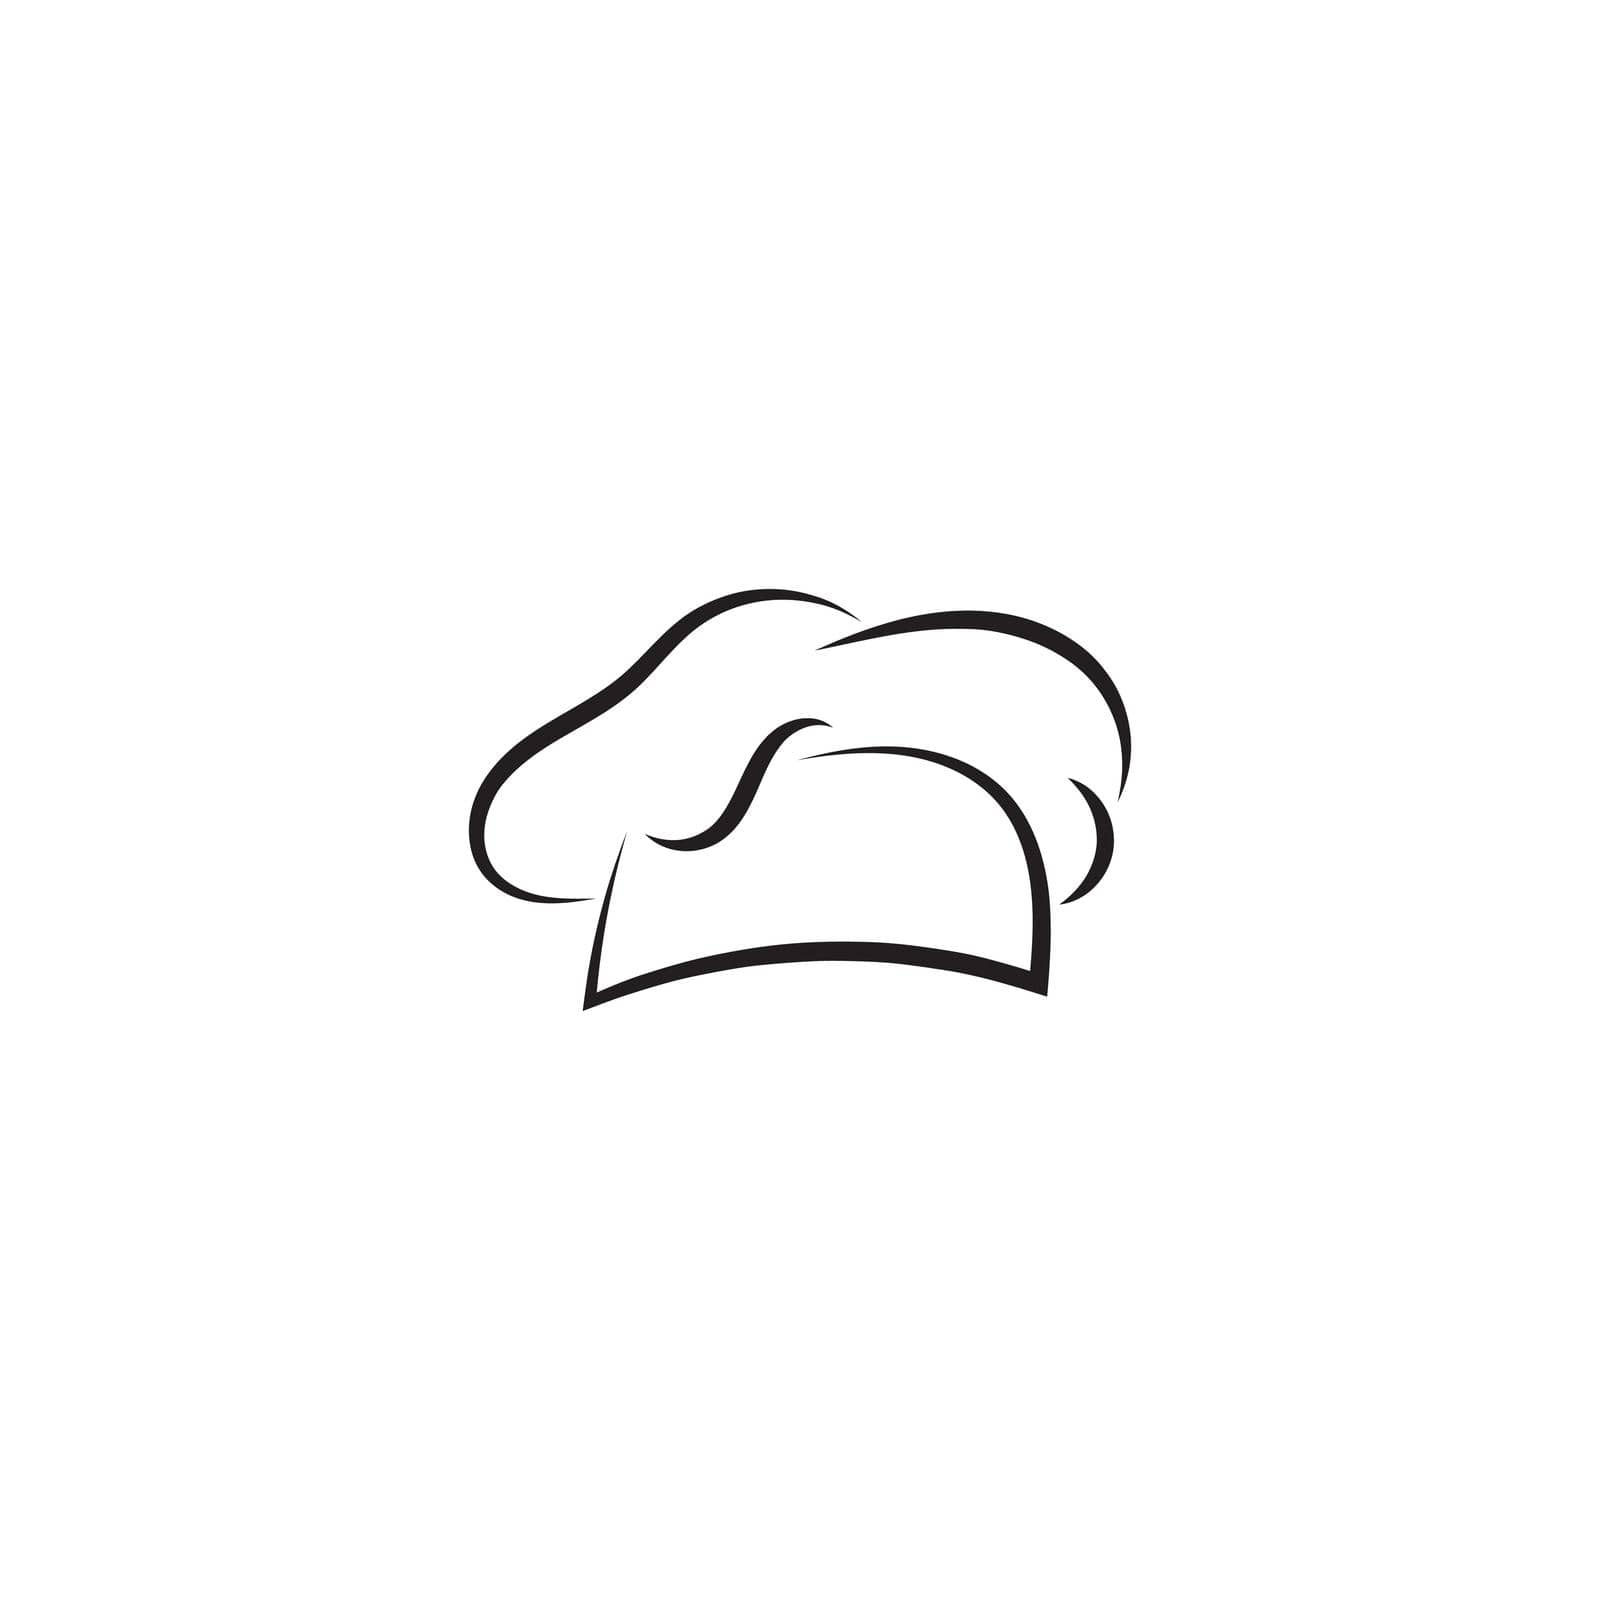 chef hat logo vector design template by Graphicindo